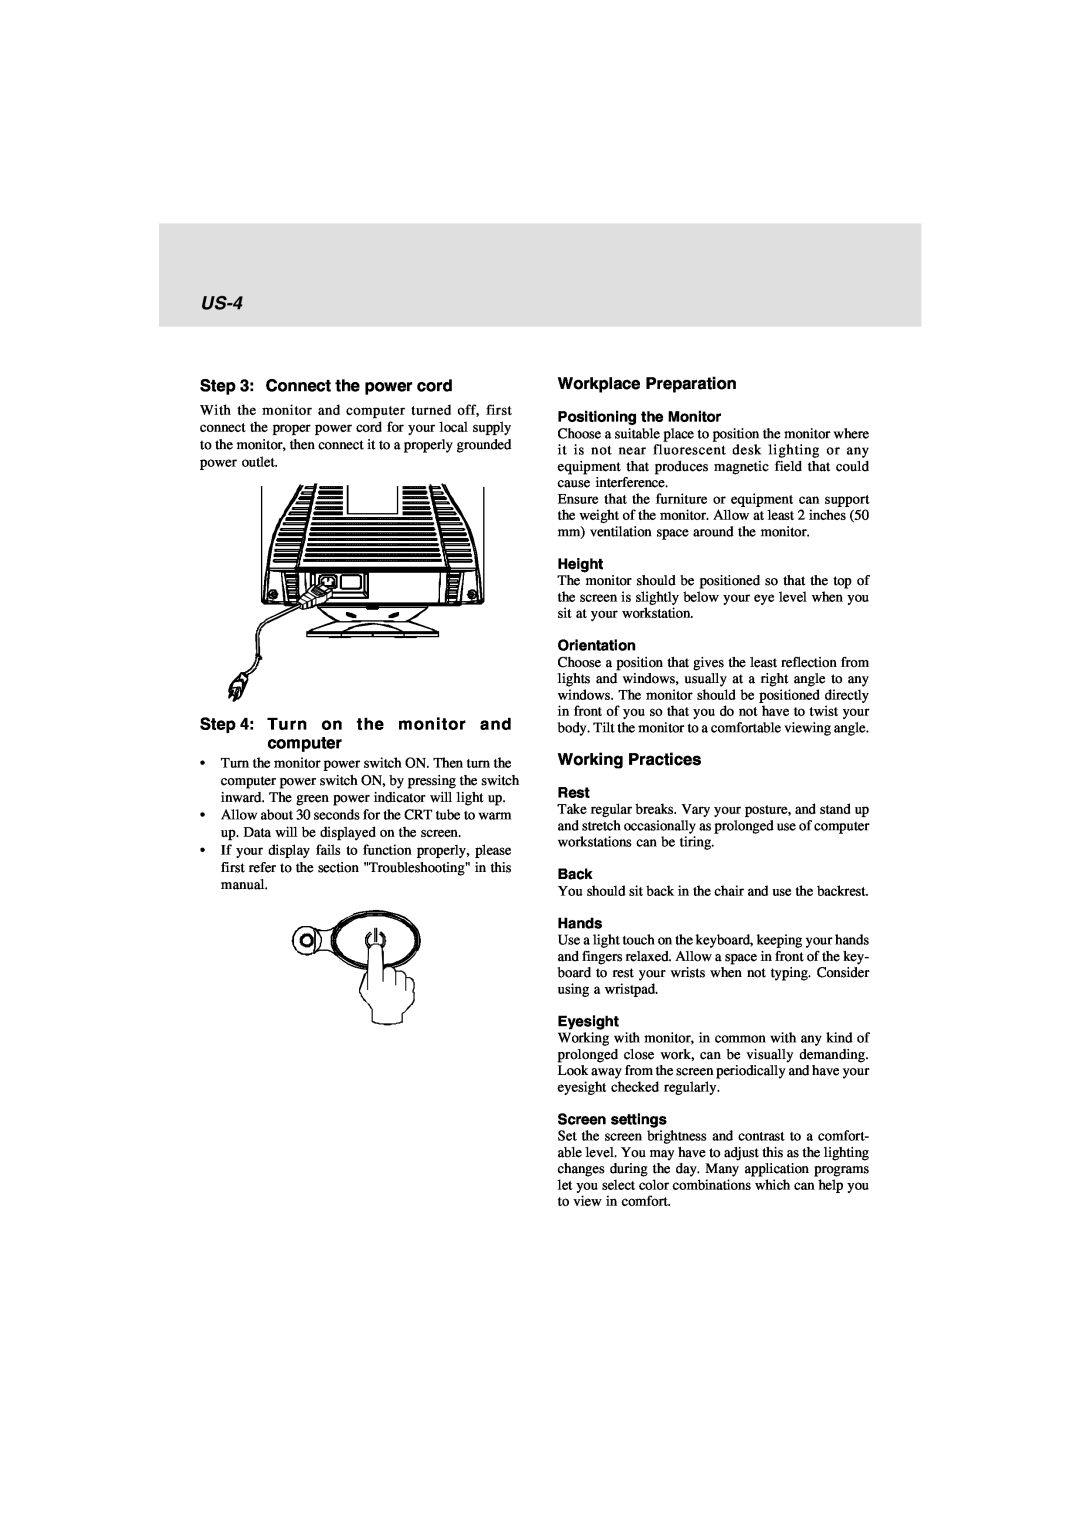 Lenovo E74 manual US-4, Positioning the Monitor, Height, Orientation, Rest, Back, Hands, Eyesight, Screen settings 